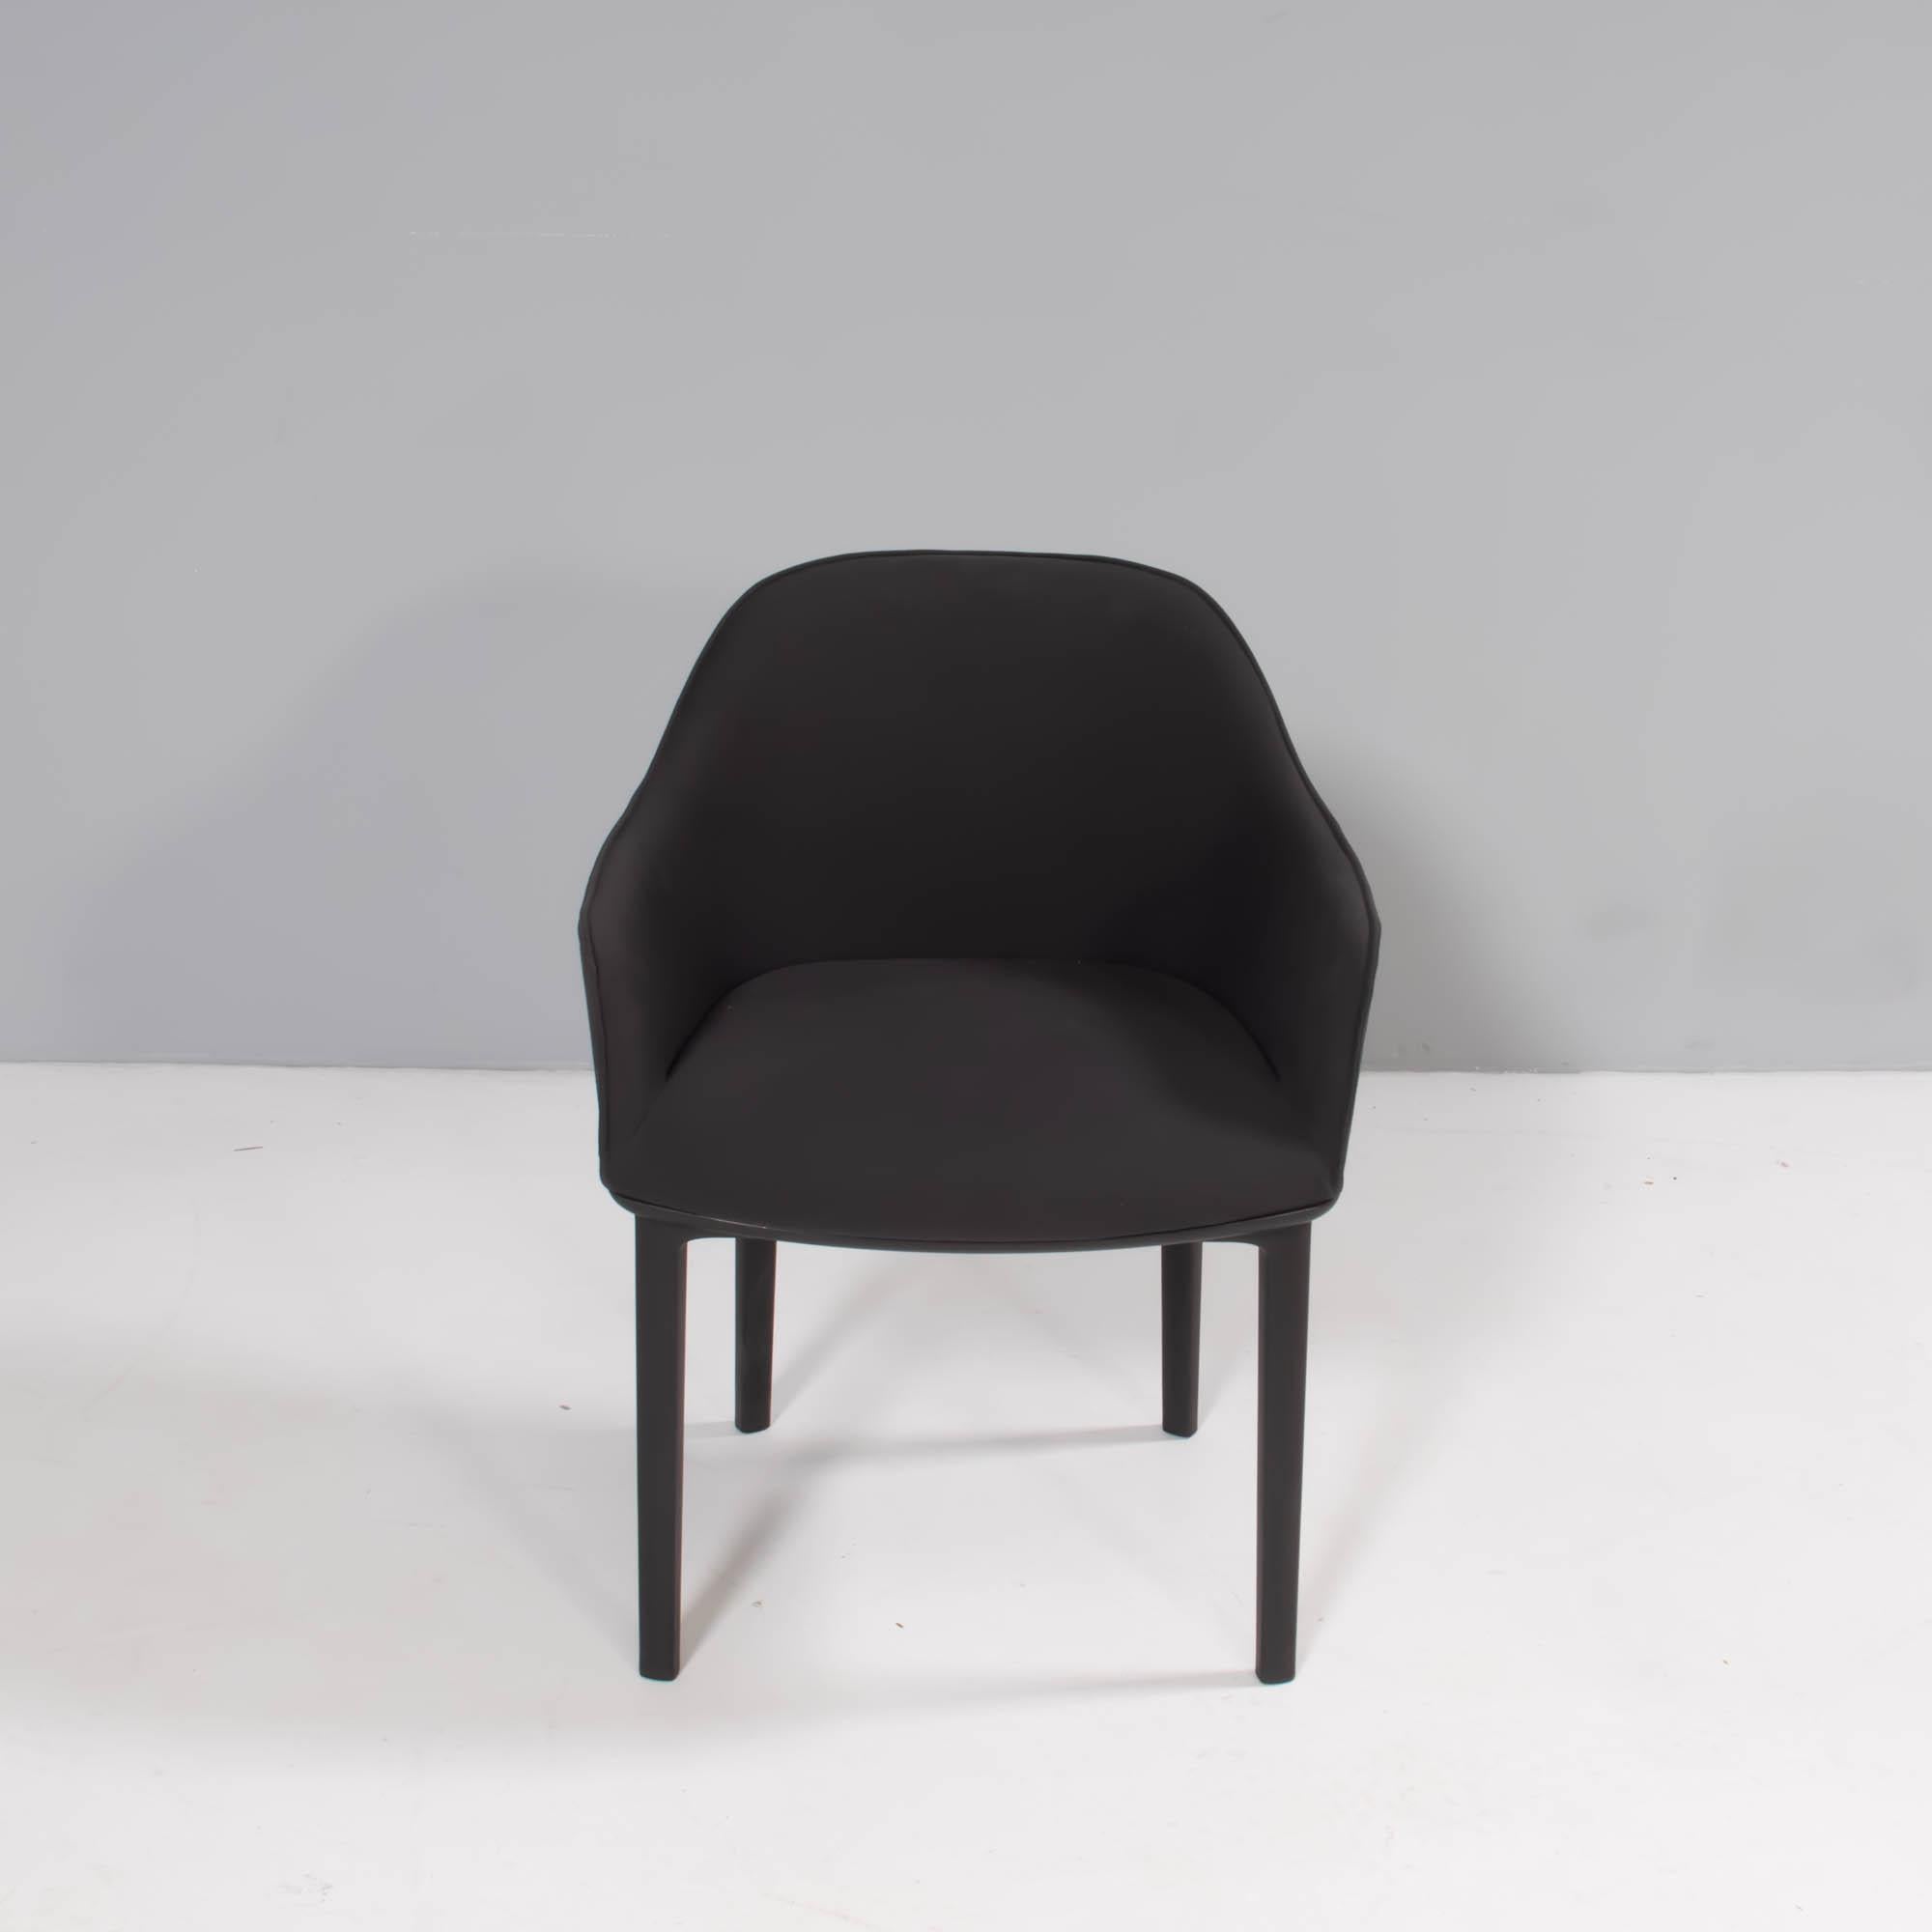 Contemporary Vitra by Ronan & Erwan Bouroullec Softshell Black Dining Chairs, Set of 6